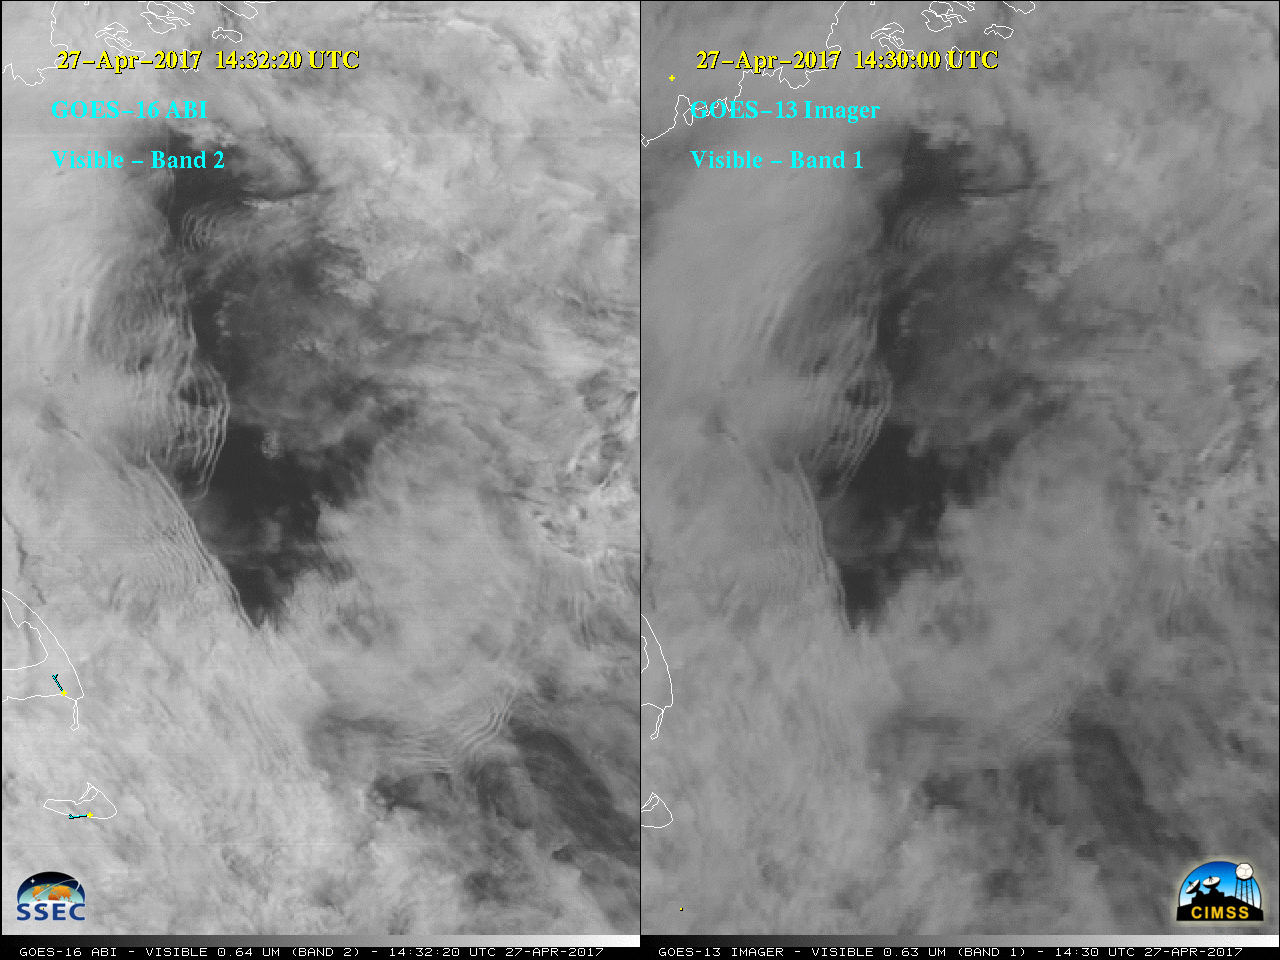 GOES-16 Visible (0.64 µm, left) and GOES-13 Visible (0.63 µm, right) images [click to play animation] 